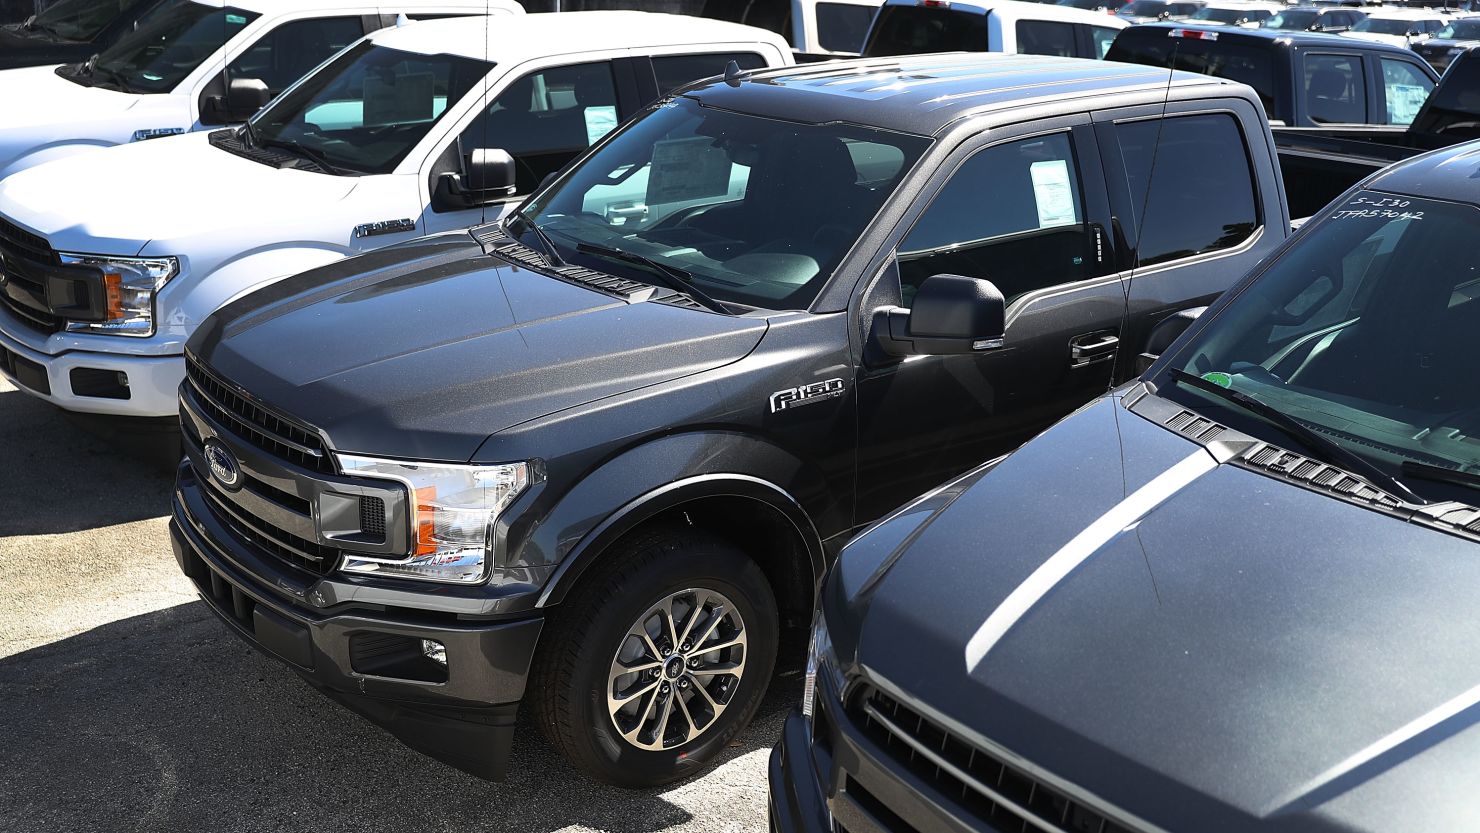 Ford F-150 trucks in 2017. The recall affects 2015-2018 F-150 Regular Cab and SuperCrew Cab vehicles.